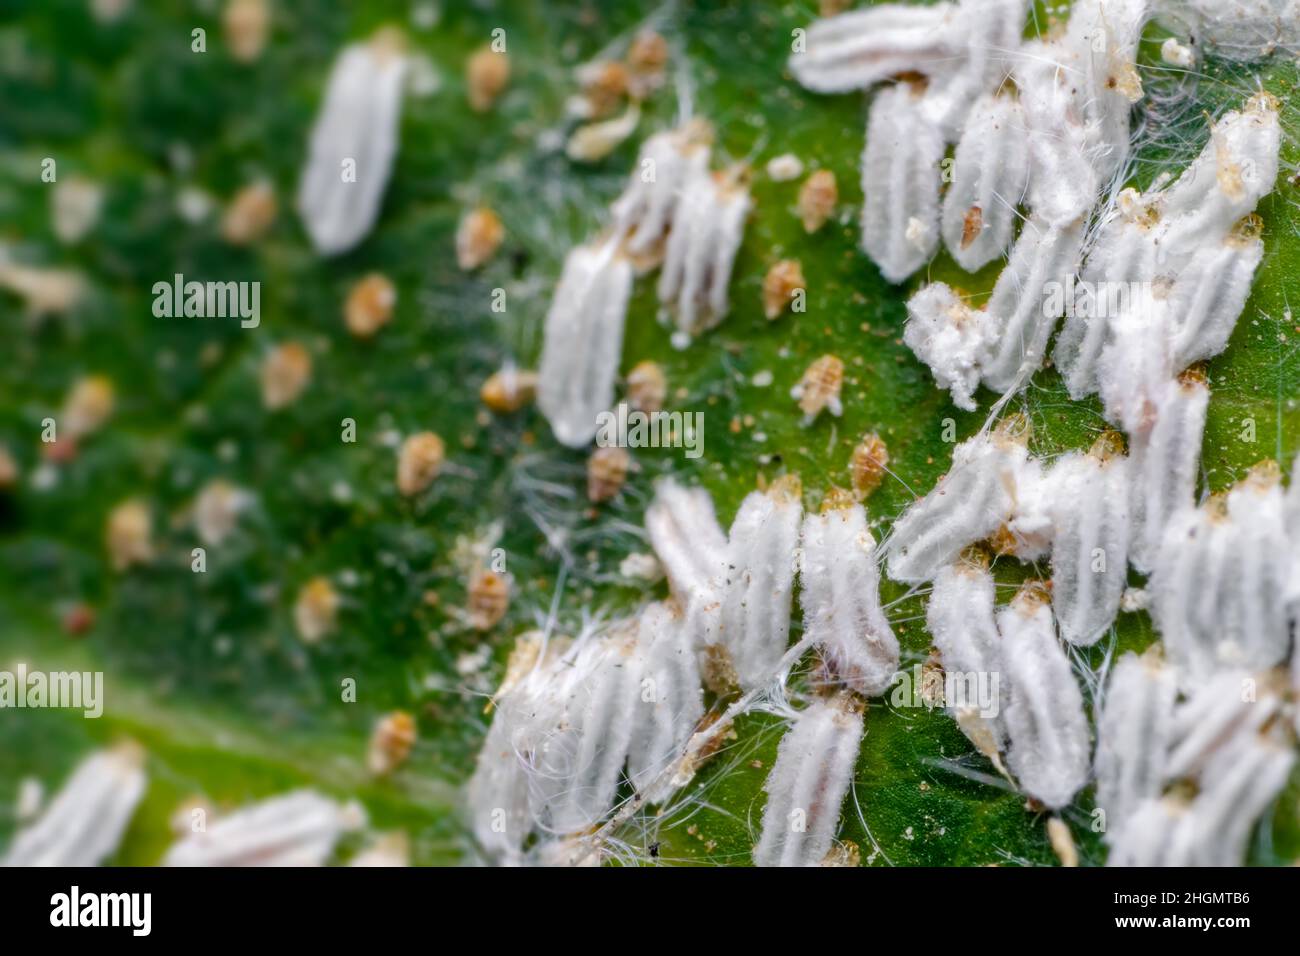 Aulacaspis which are scale insects also known as Asian cycad scale which damage many ornamental and agricultural crops. Stock Photo